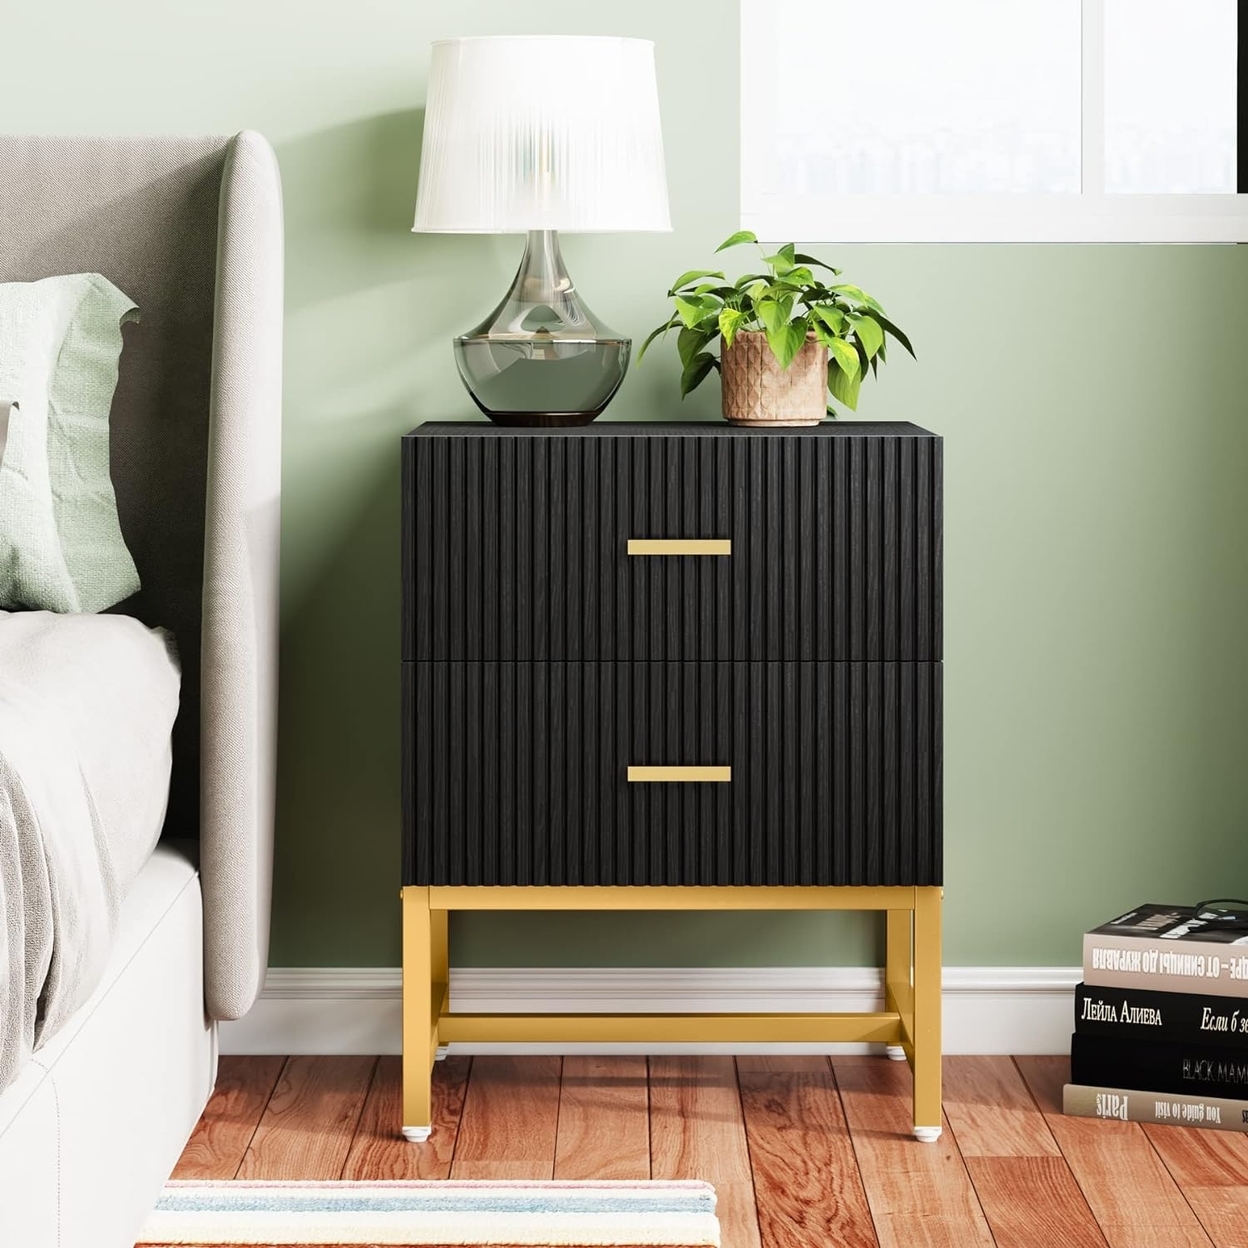 Tribesigns 2-Drawer Nightstand,Wood Night Stands Bed Side Table With Storage Large, Modern End Table Accent Table - Black & Gold, 1pc